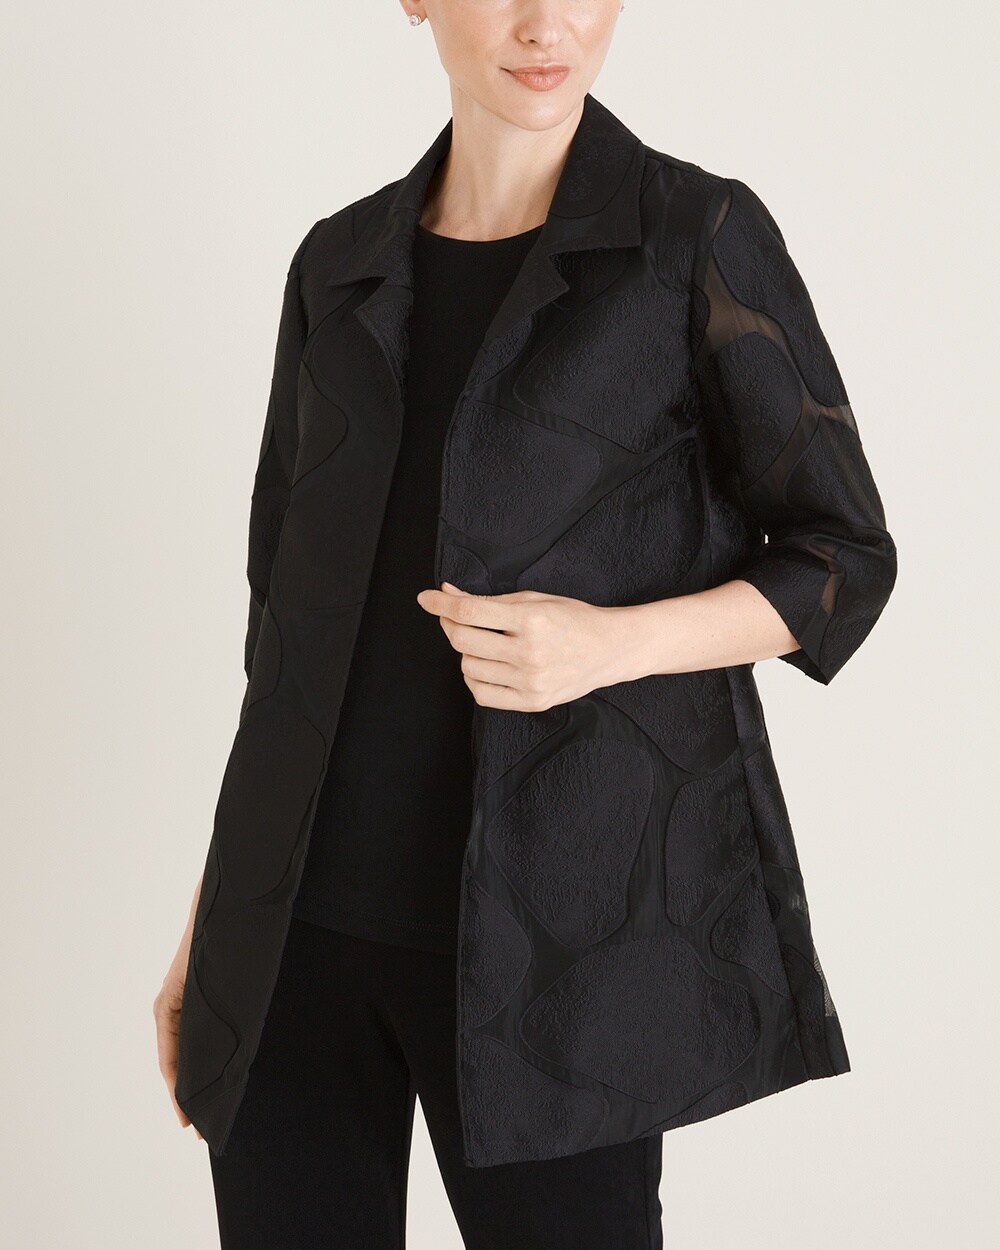 Travelers Collection Organza Jacket